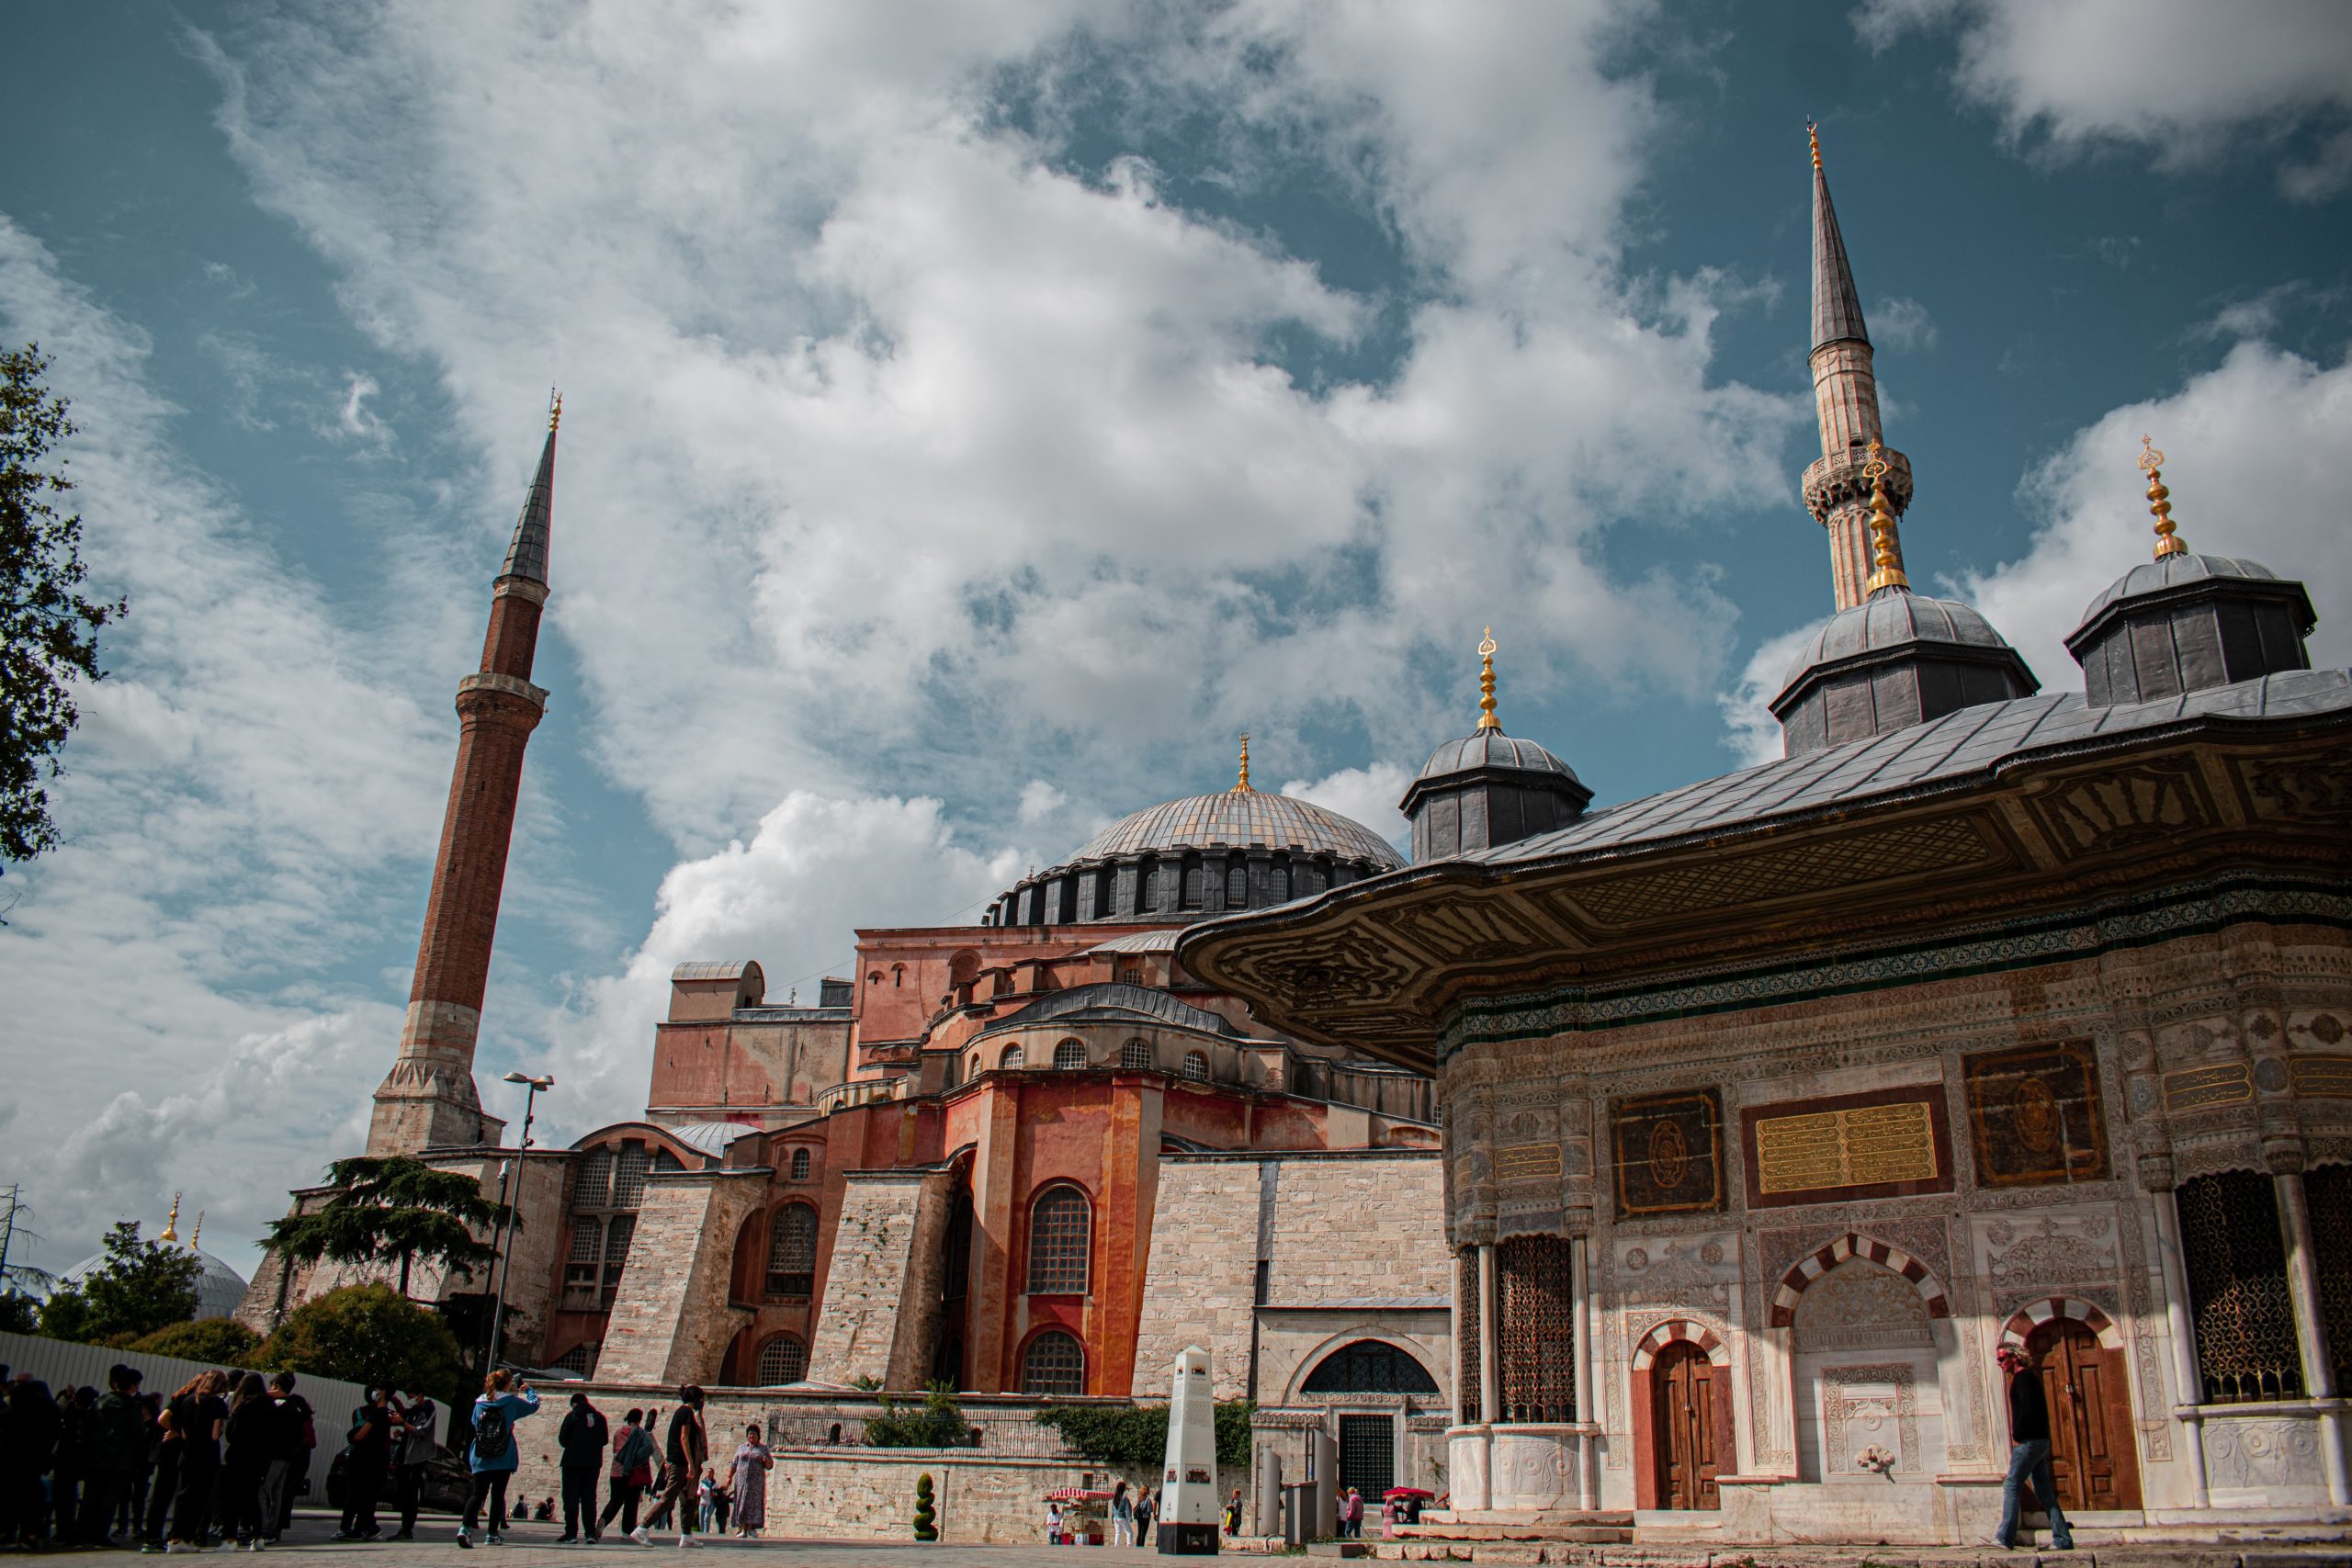 Protestant Christians in Turkey Exposed to Discrimination, Deportations, Hate Speech